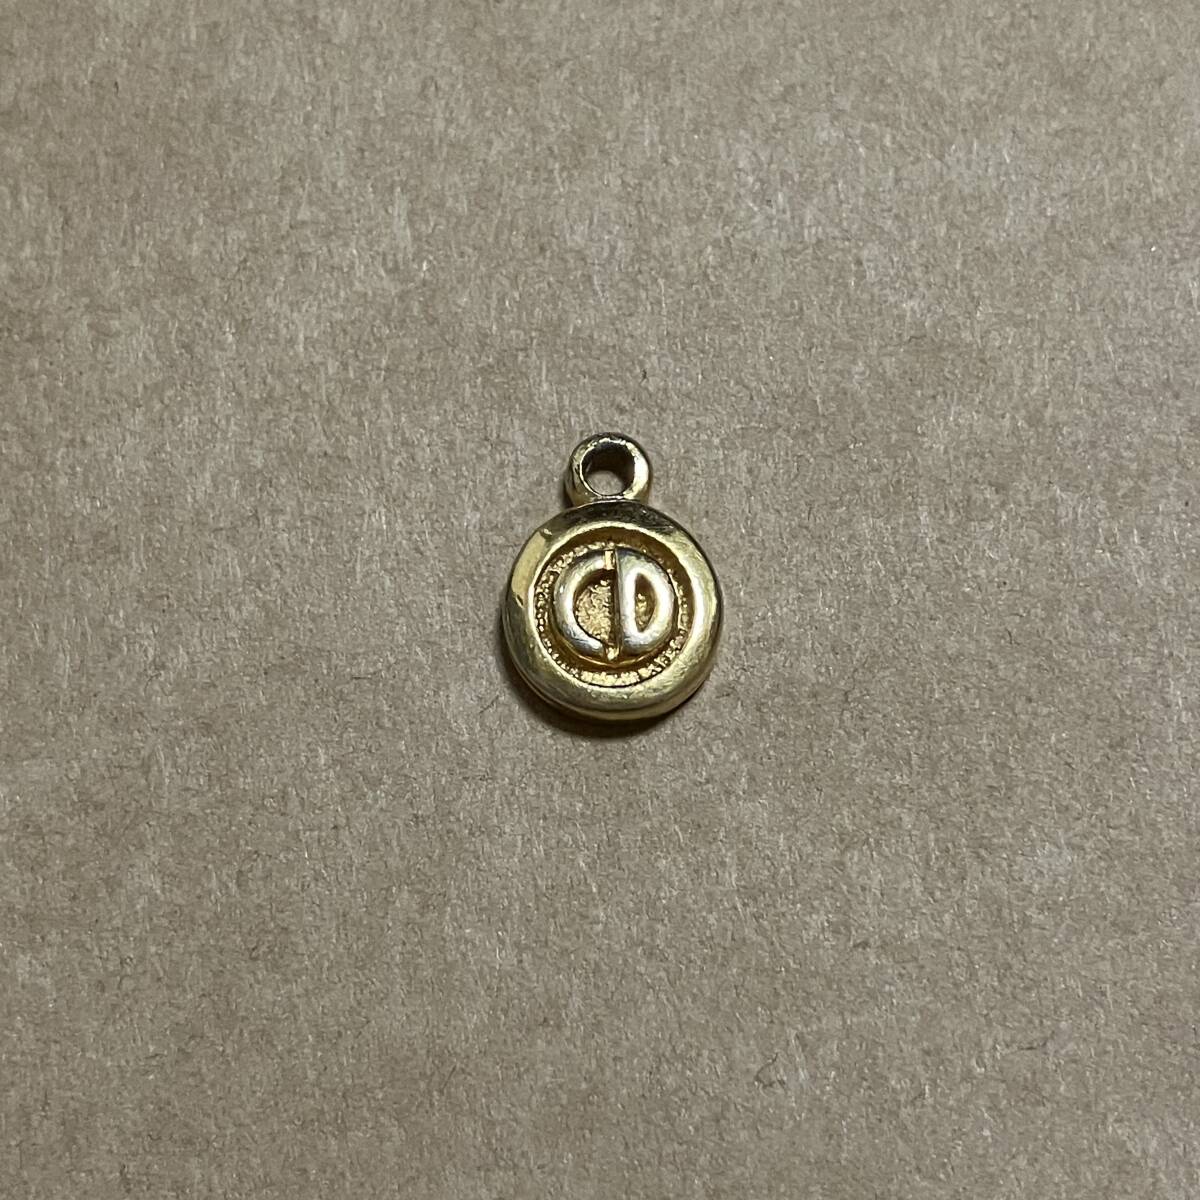 used Christian Dior Dior pendant top approximately 14mm gold color 